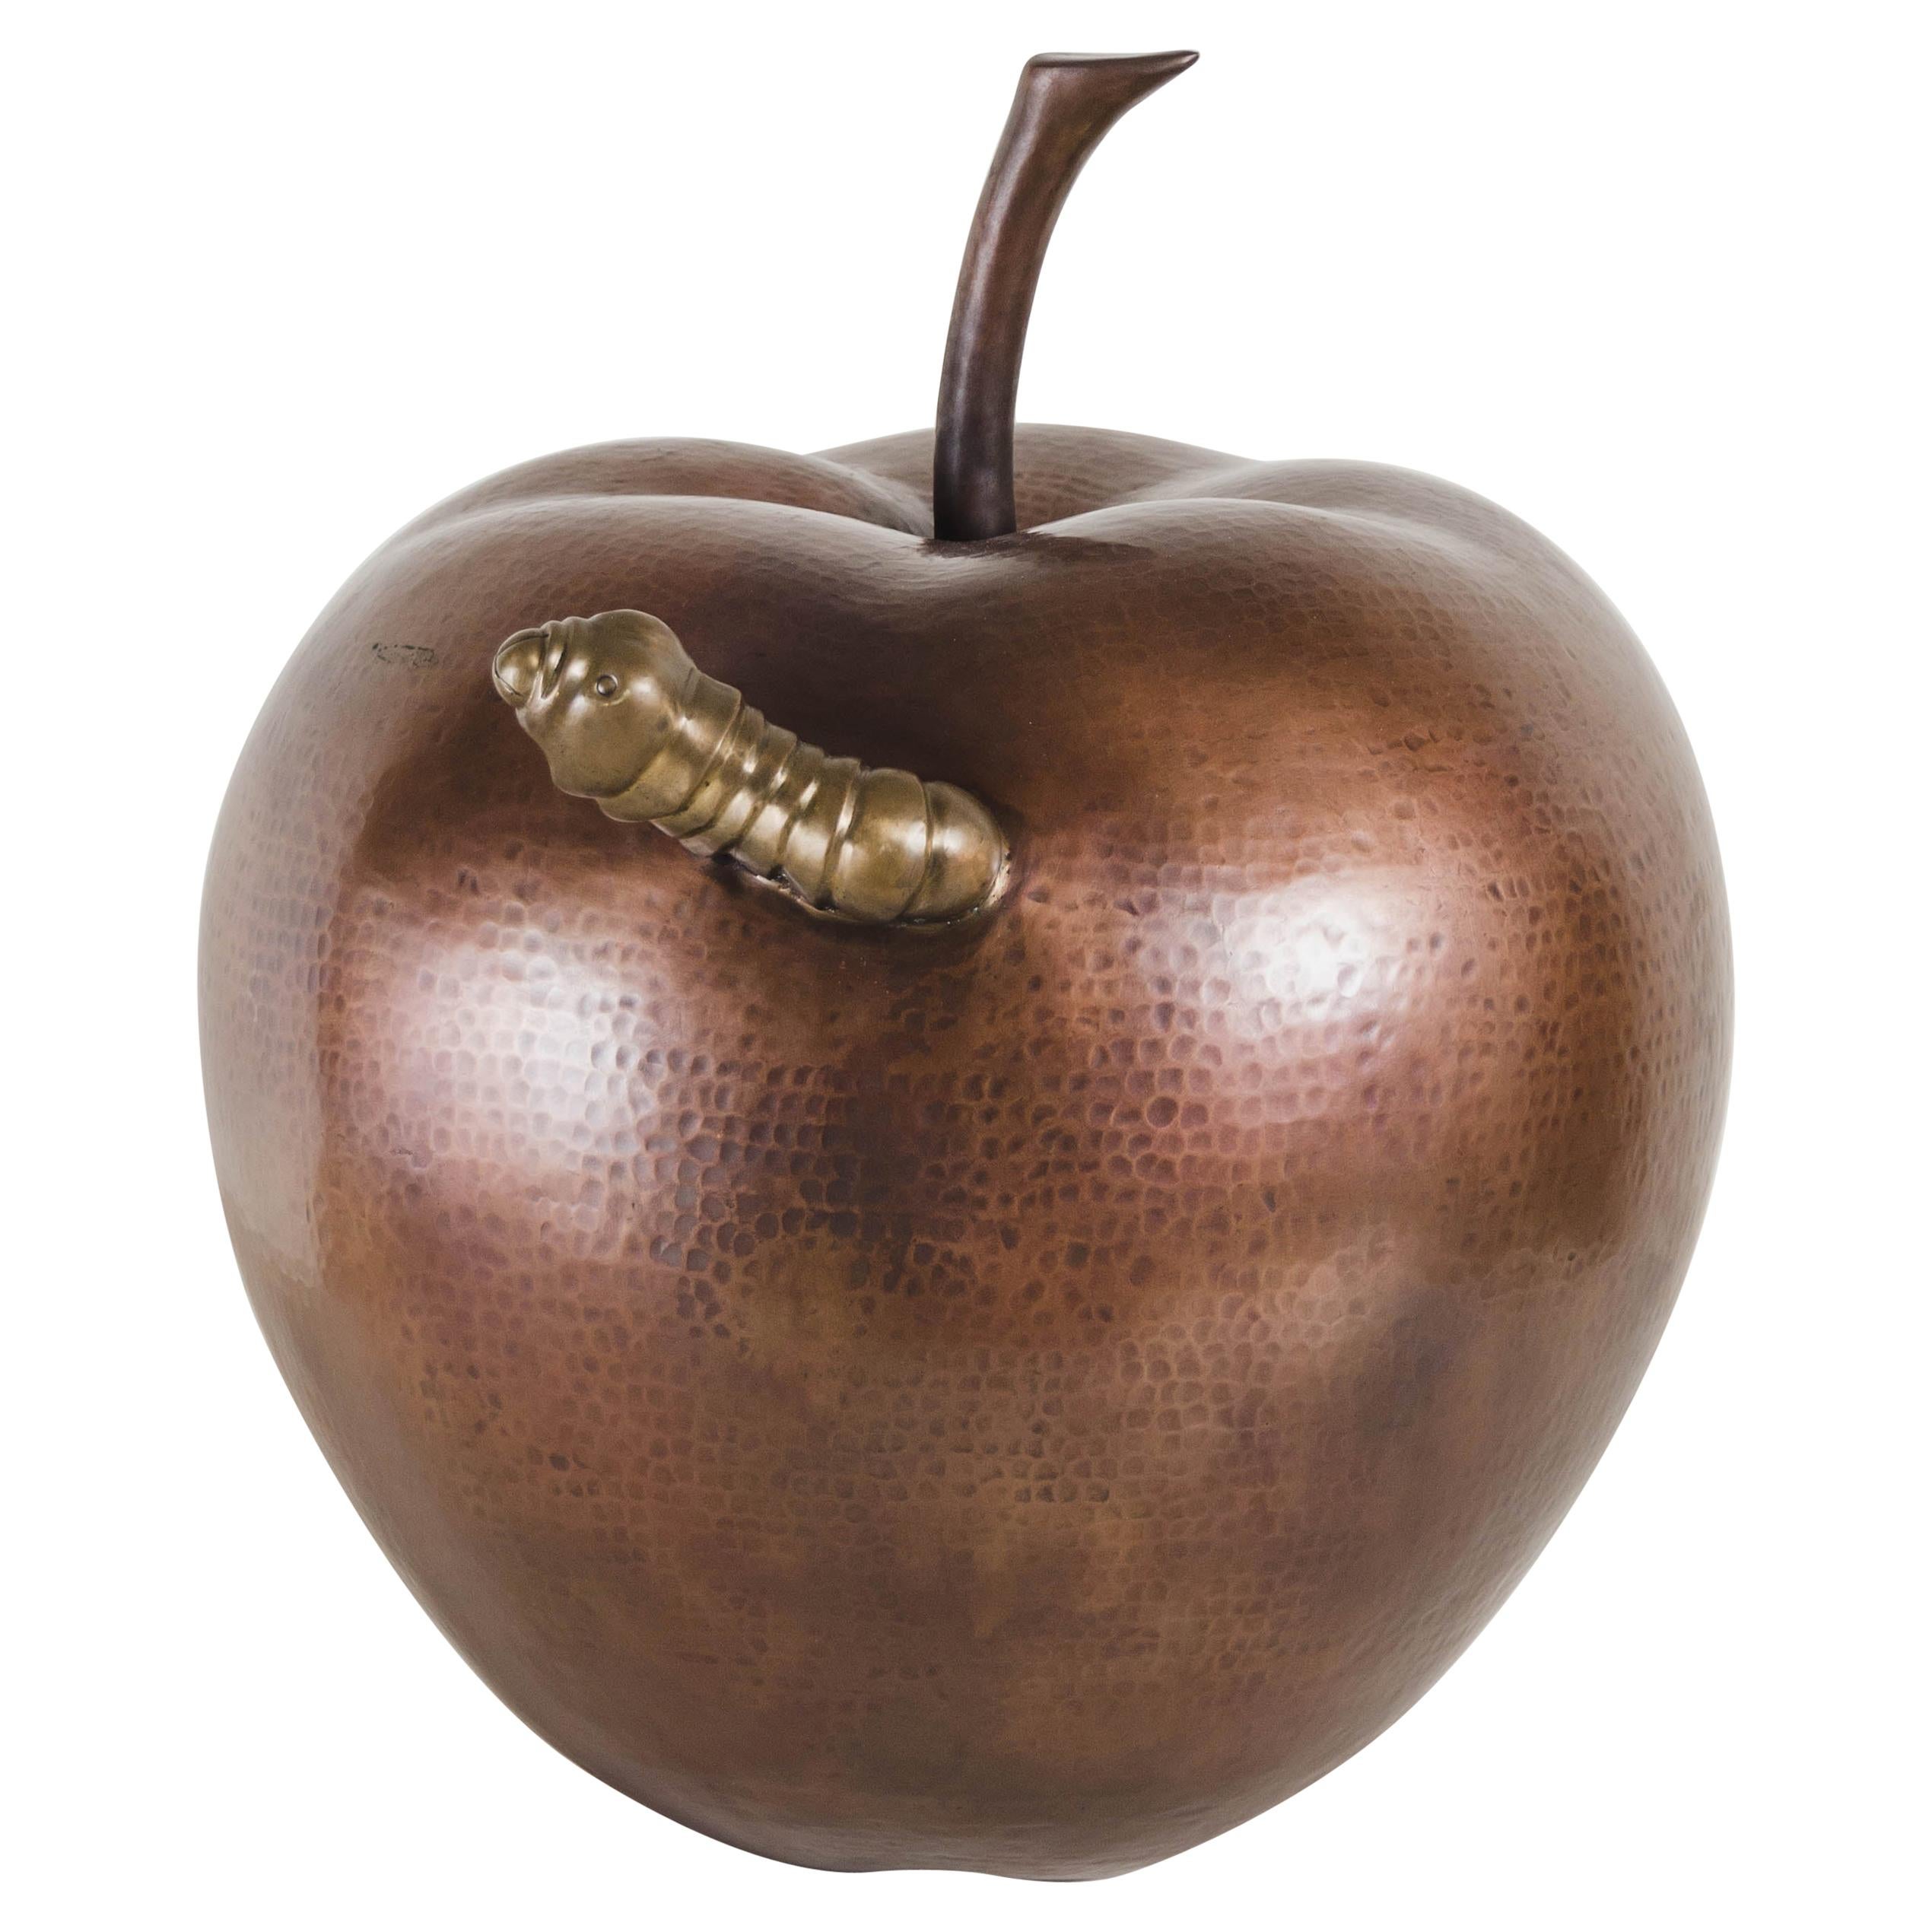 Contemporary Apple w/ Worm Sculpture in Antique Copper and Brass by Robert Kuo